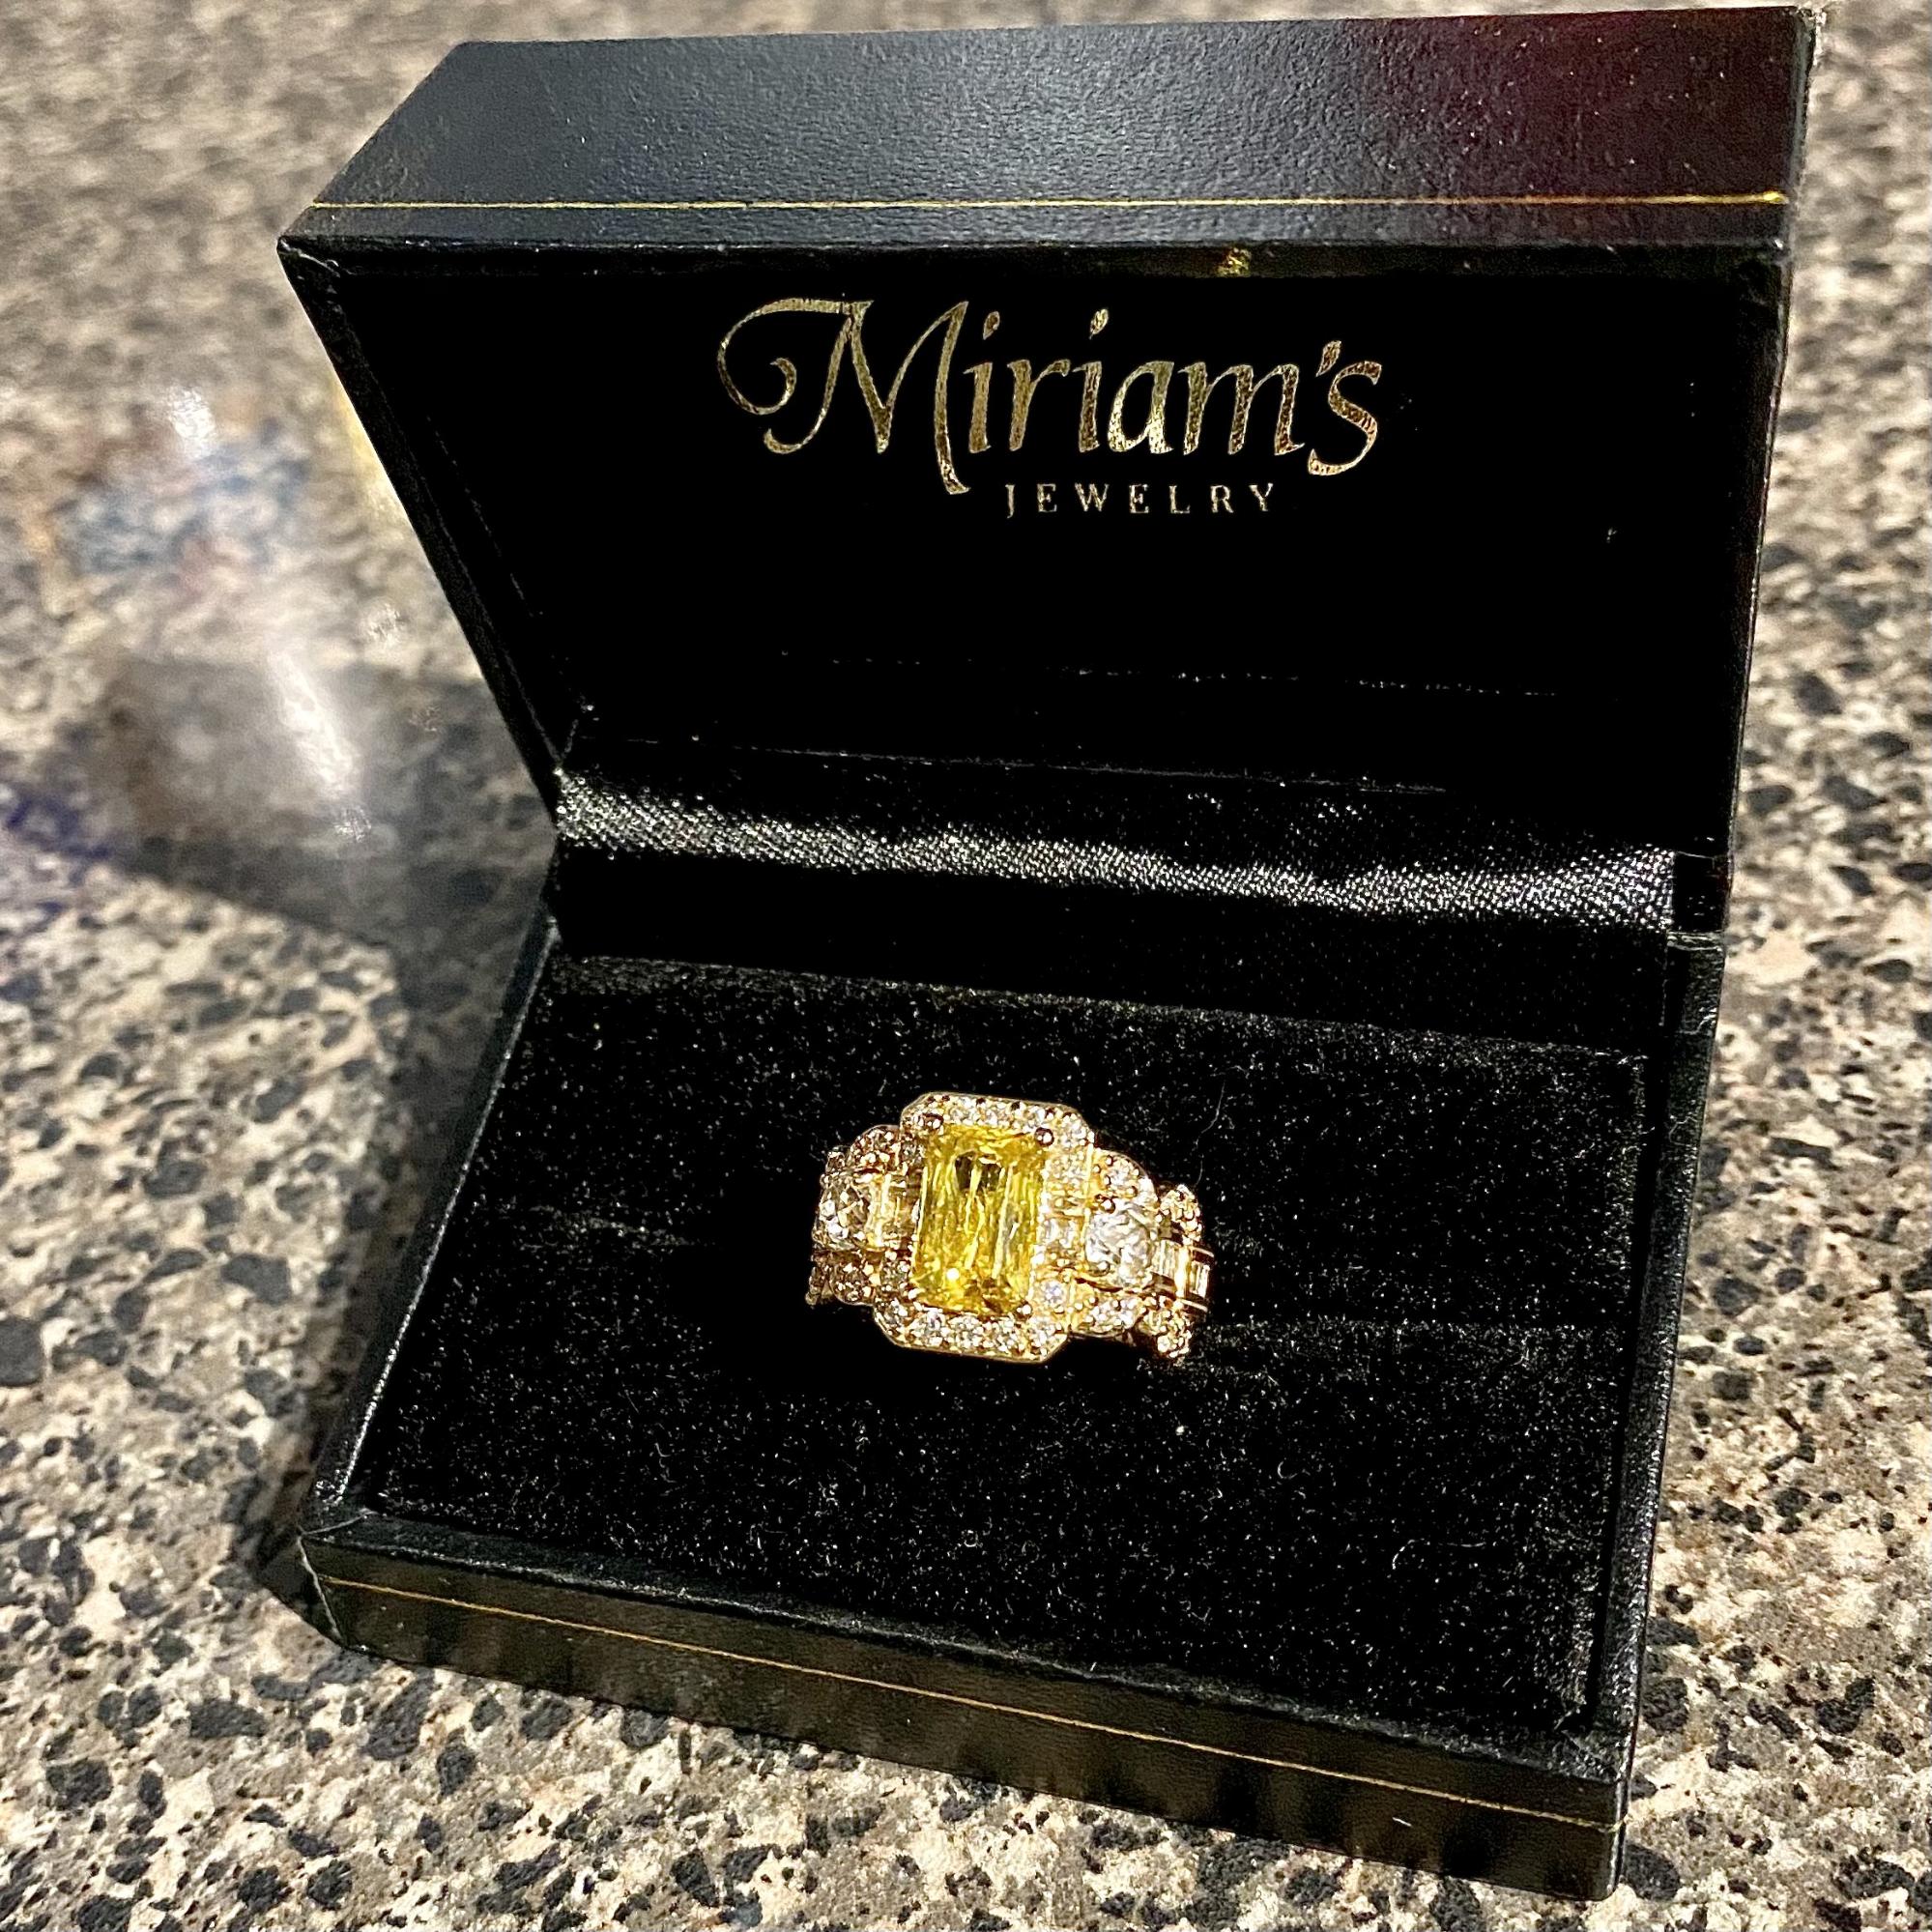 Annie’s Experience at Miriam’s Jewelry